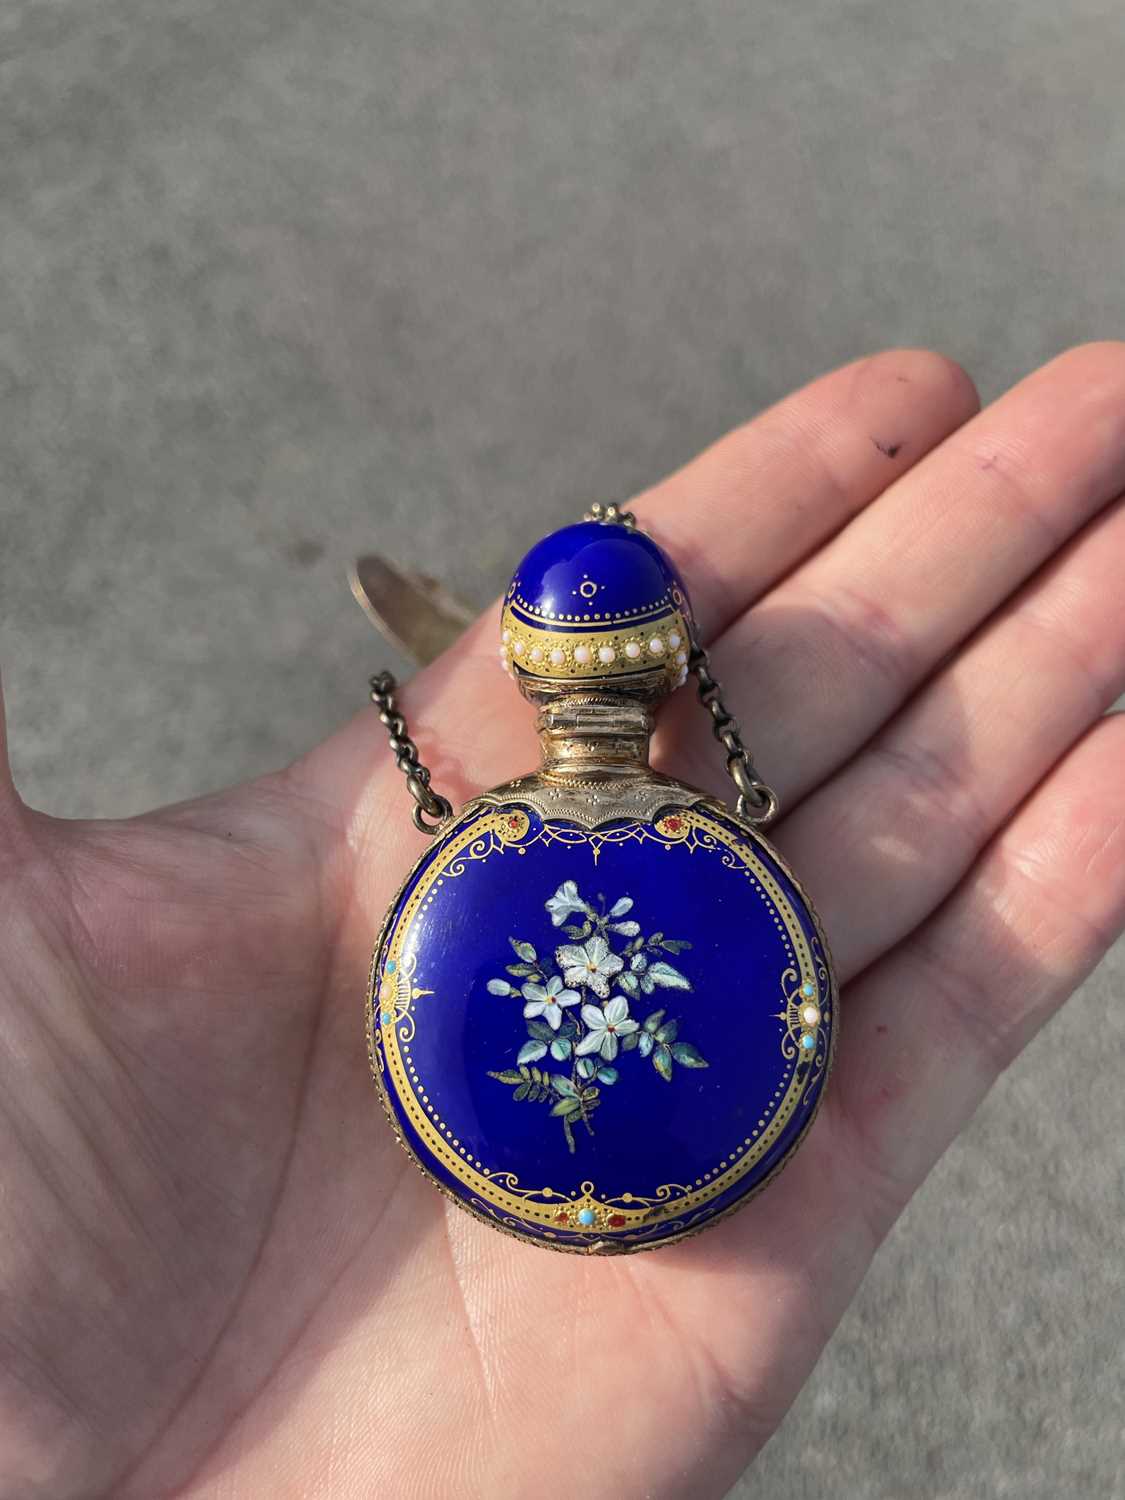 A FRENCH SILVER AND ENAMEL SCENT BOTTLE, MID-19TH CENTURY - Image 6 of 8